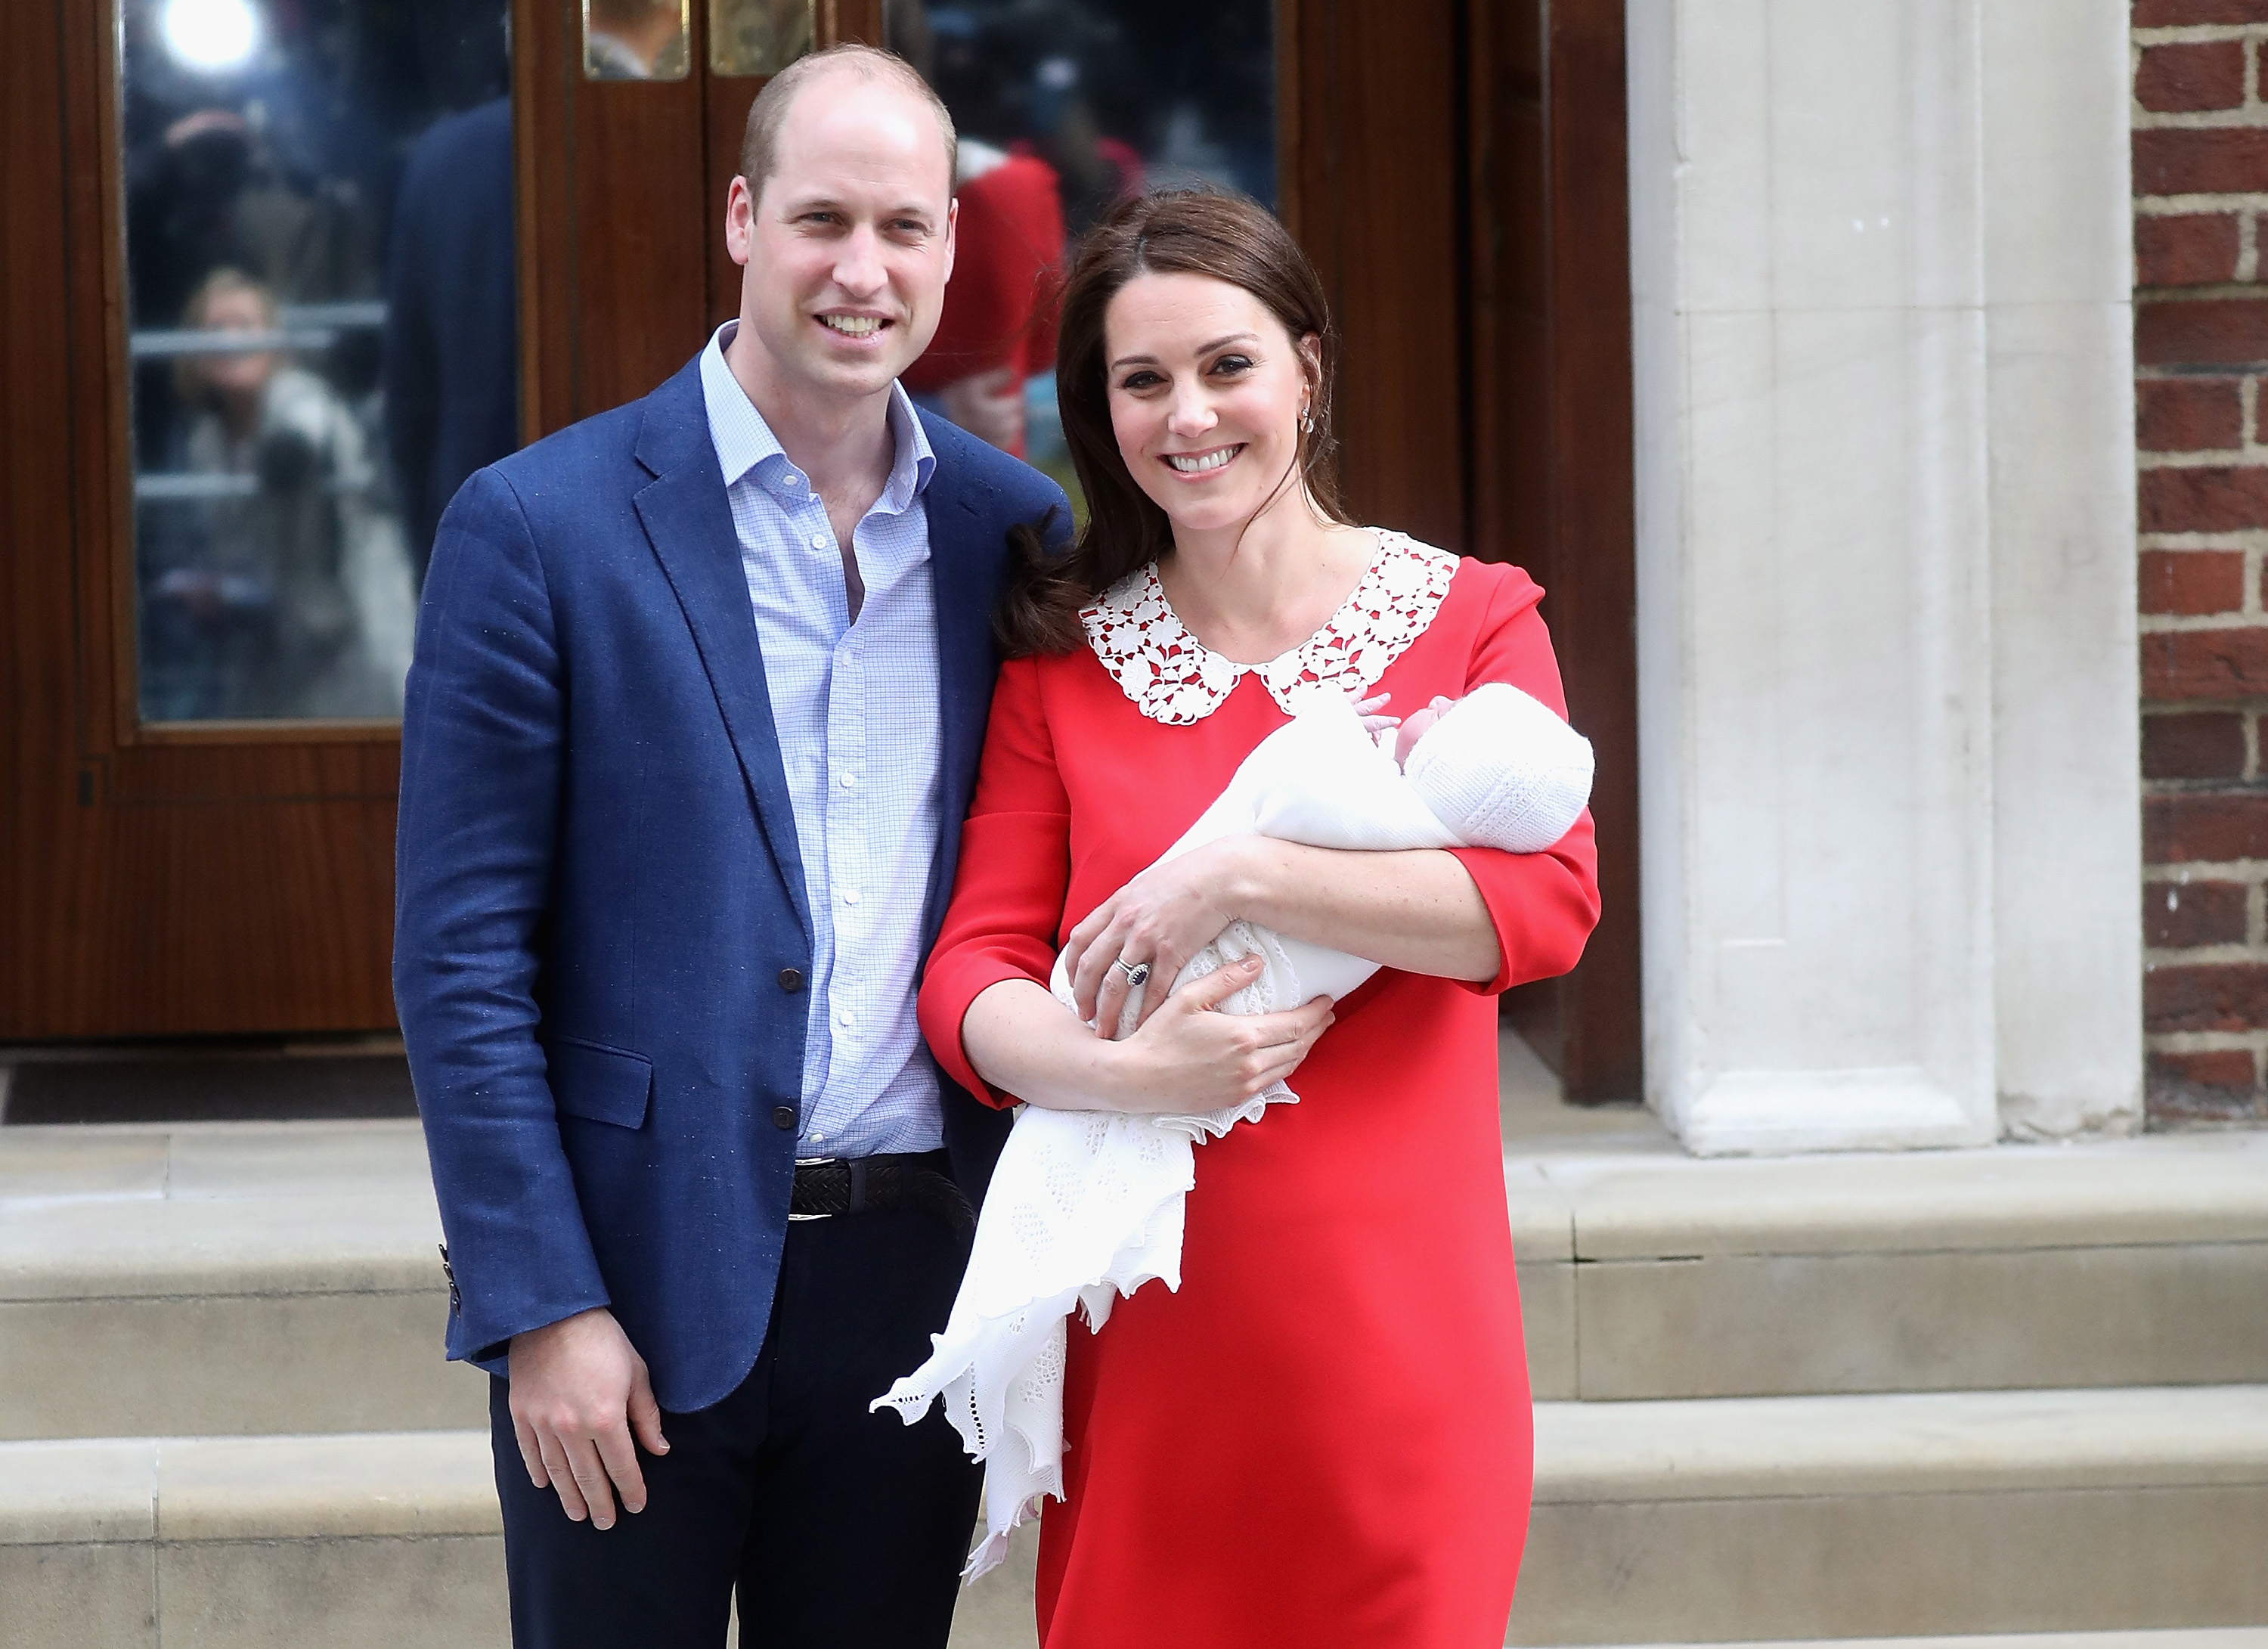 Prince William, Duke of Cambridge and Catherine, Duchess of Cambridge depart the Lindo Wing with their newborn son at St Mary's Hospital on April 23, 2018 in London, England. The Duchess safely delivered a boy at 11:01 am, weighing 8lbs 7oz, who will be fifth in line to the throne. (Chris Jackson—Getty Images)